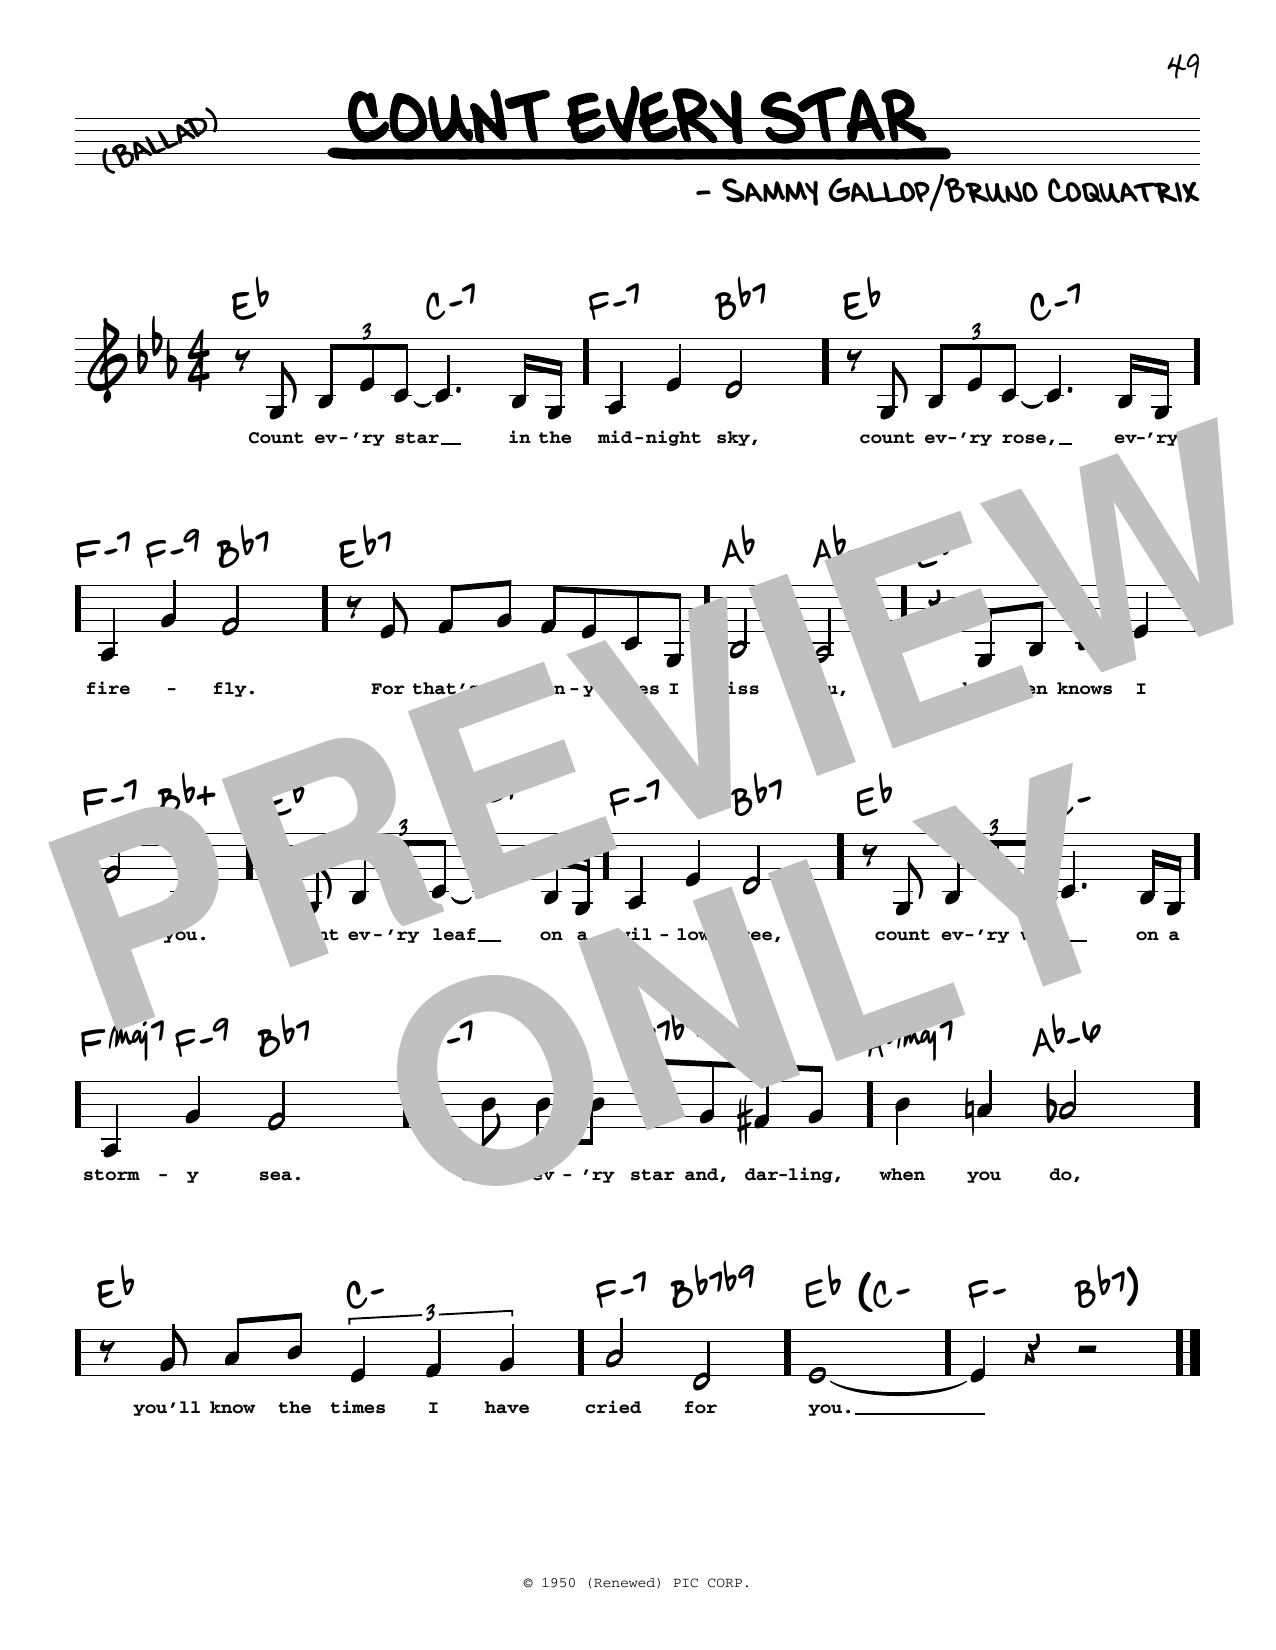 Sammy Gallop Count Every Star (Low Voice) sheet music notes printable PDF score